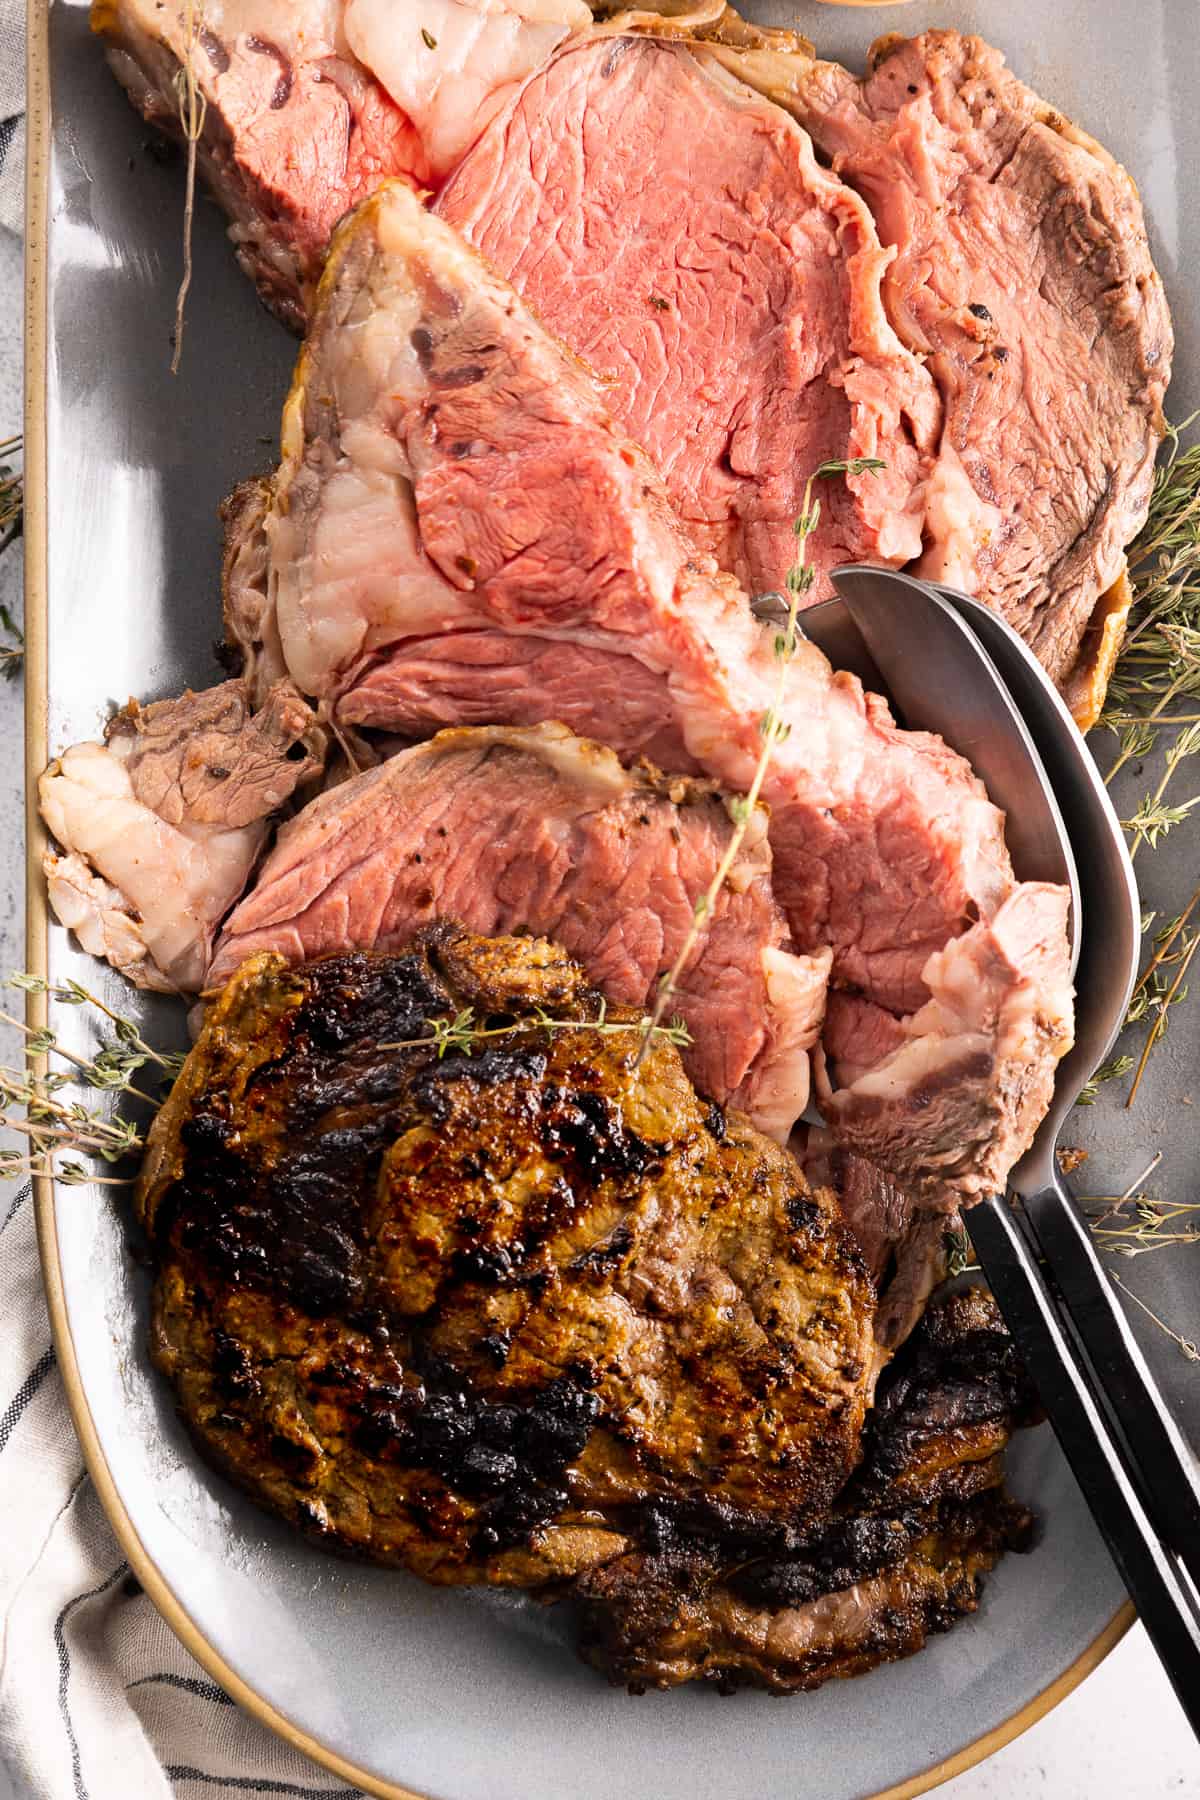 Sliced prime rib served on a platter, garnished with fresh thyme.